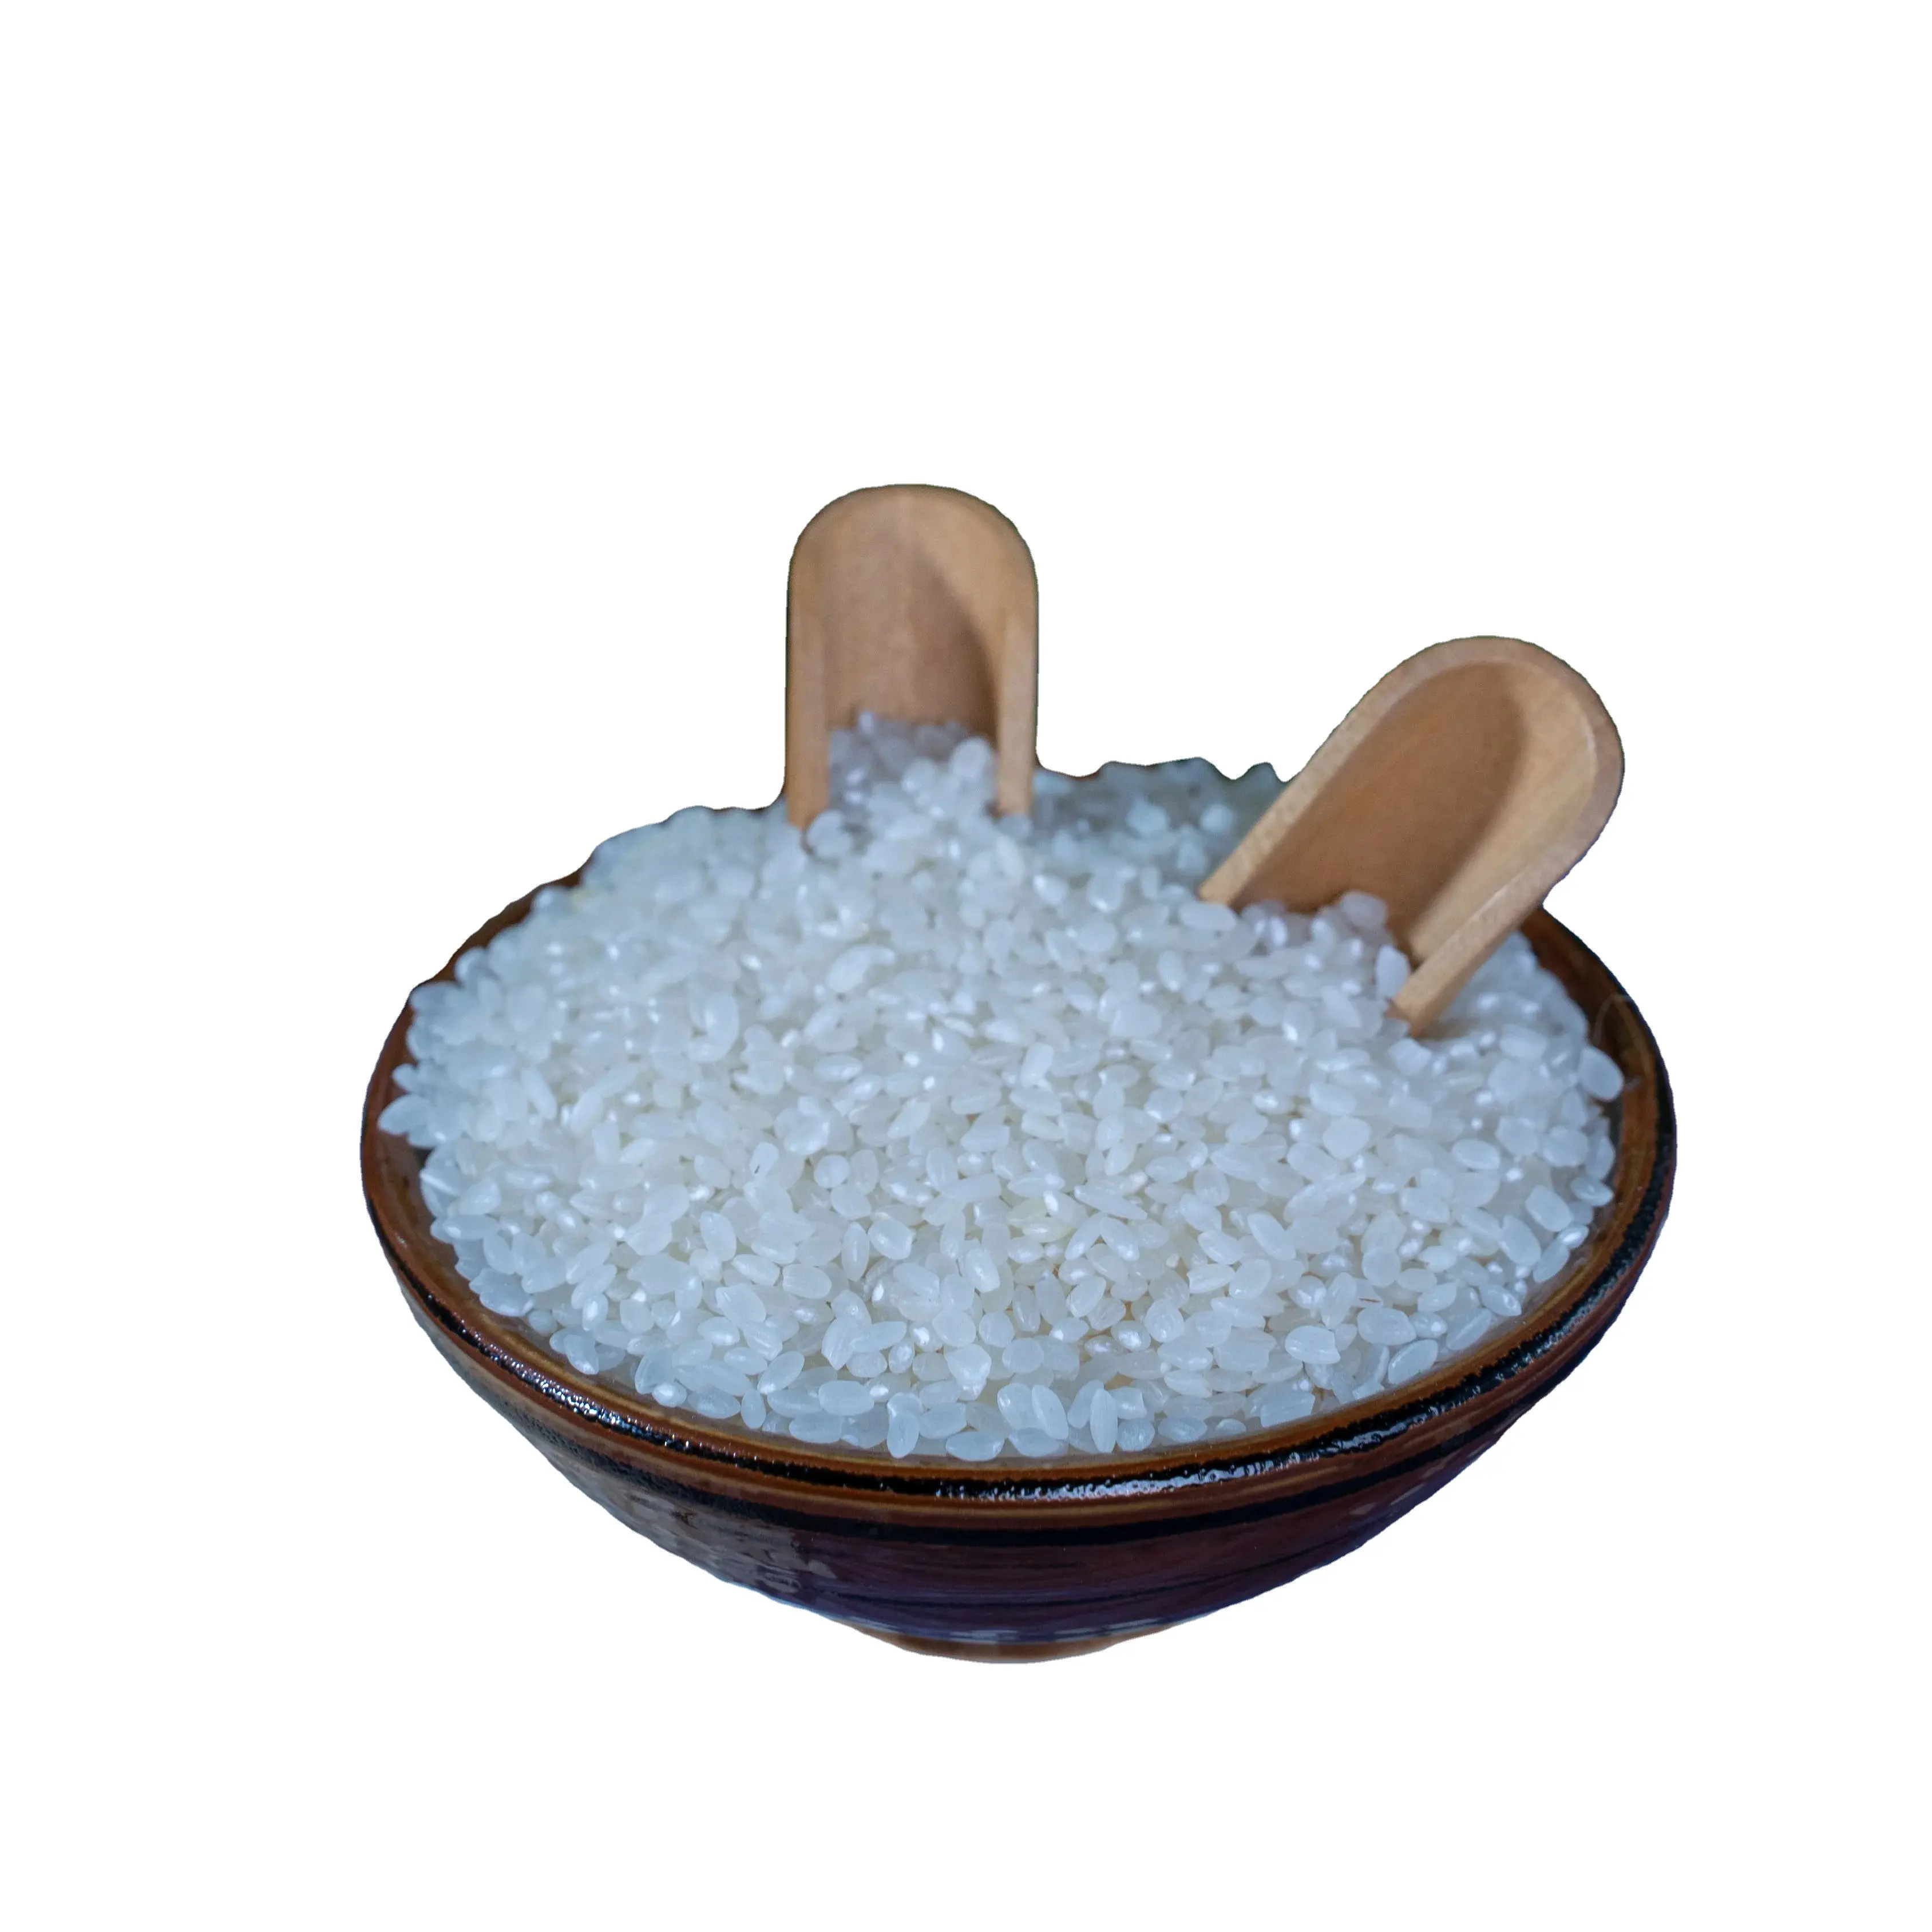 High-Certified Japonica Rice - Organic Short Grain White Rice with Round Seeds Vietnamese Rice